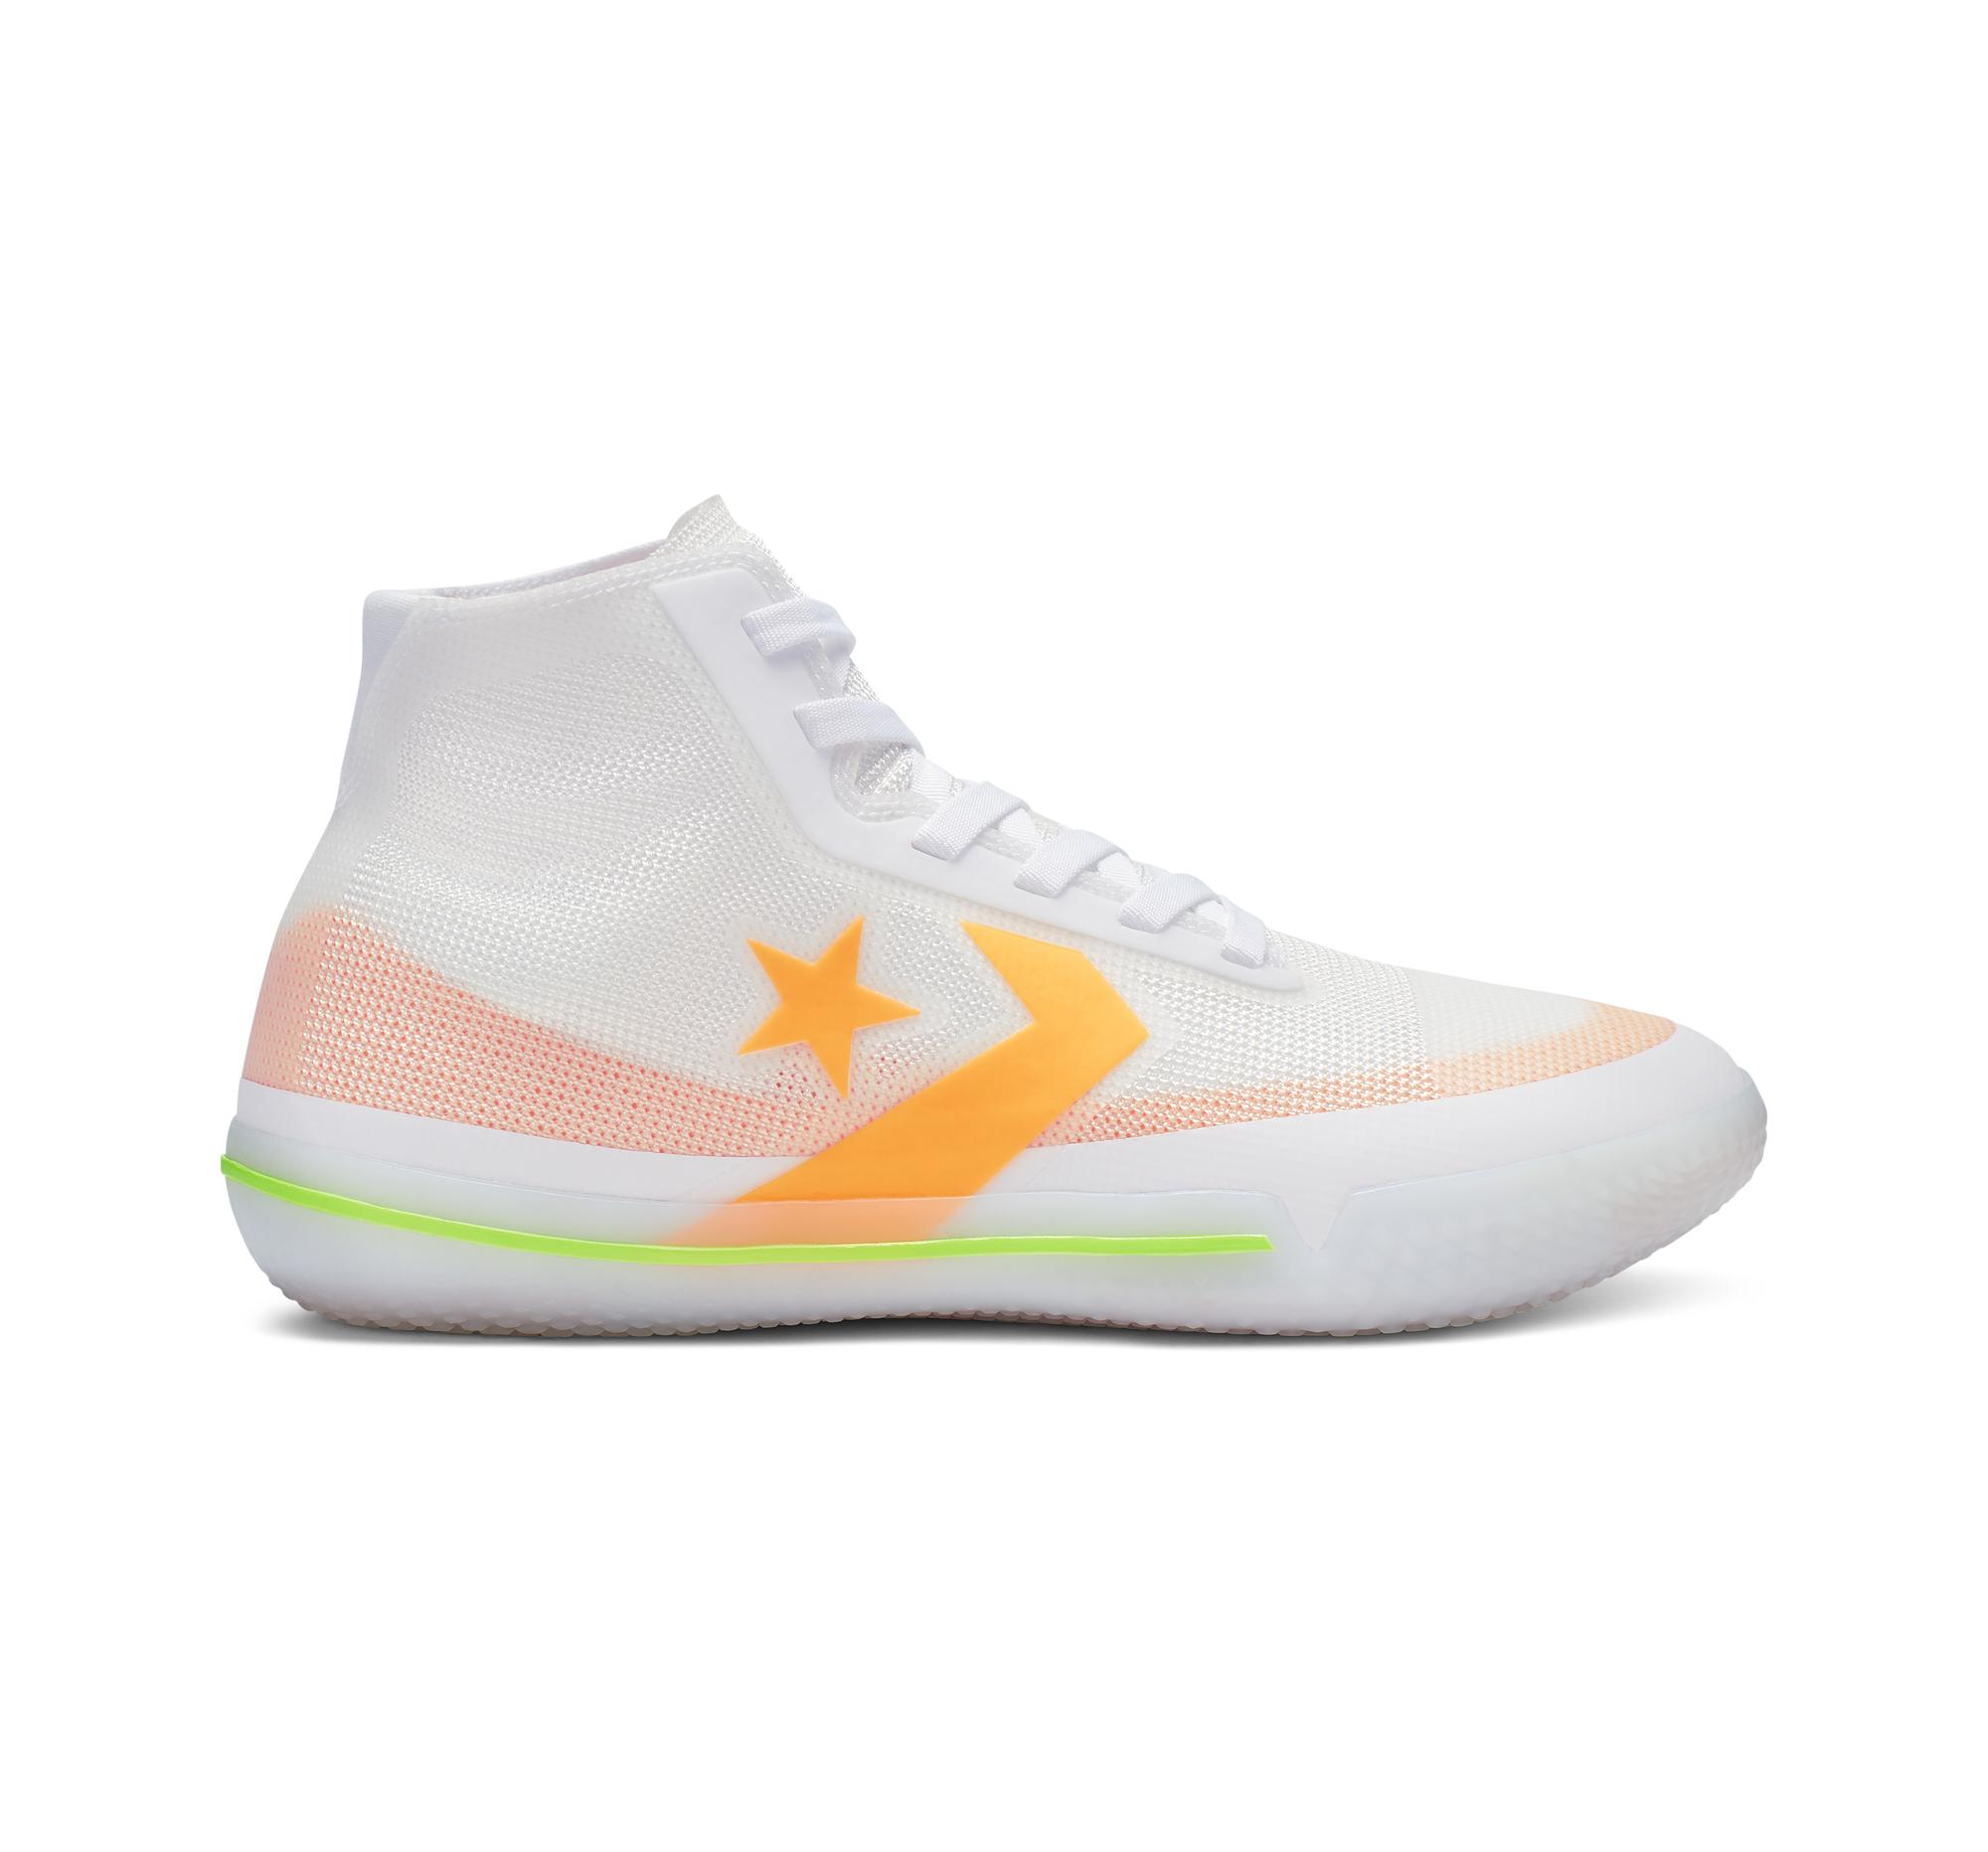 Converse All Star Pro Bb Hyperbright in 